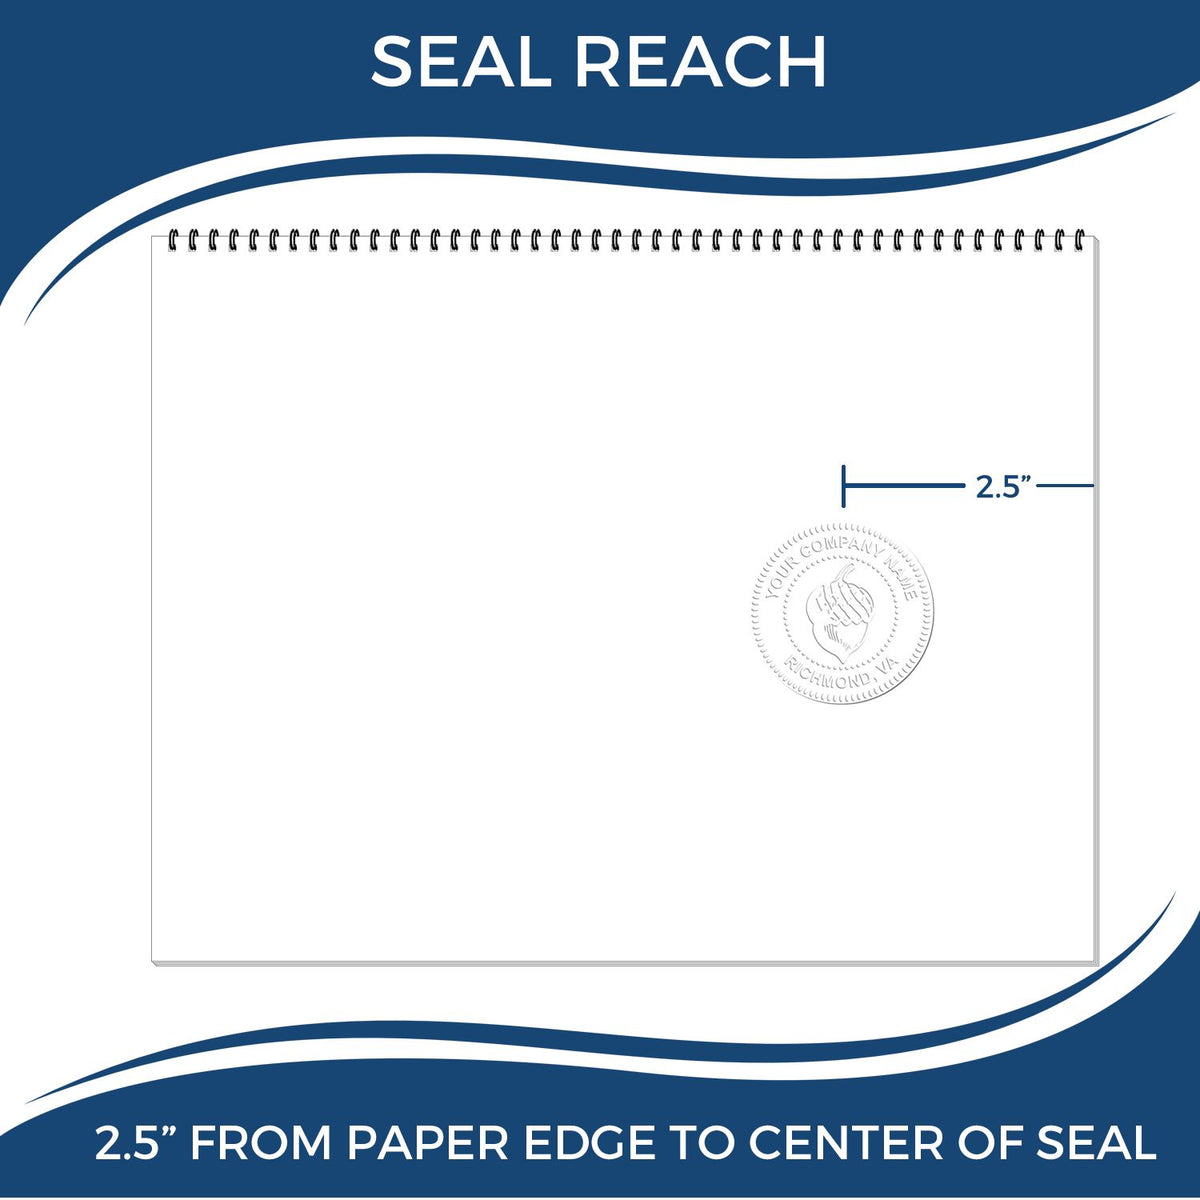 An infographic showing the seal reach which is represented by a ruler and a miniature seal image of the Long Reach Florida Land Surveyor Seal